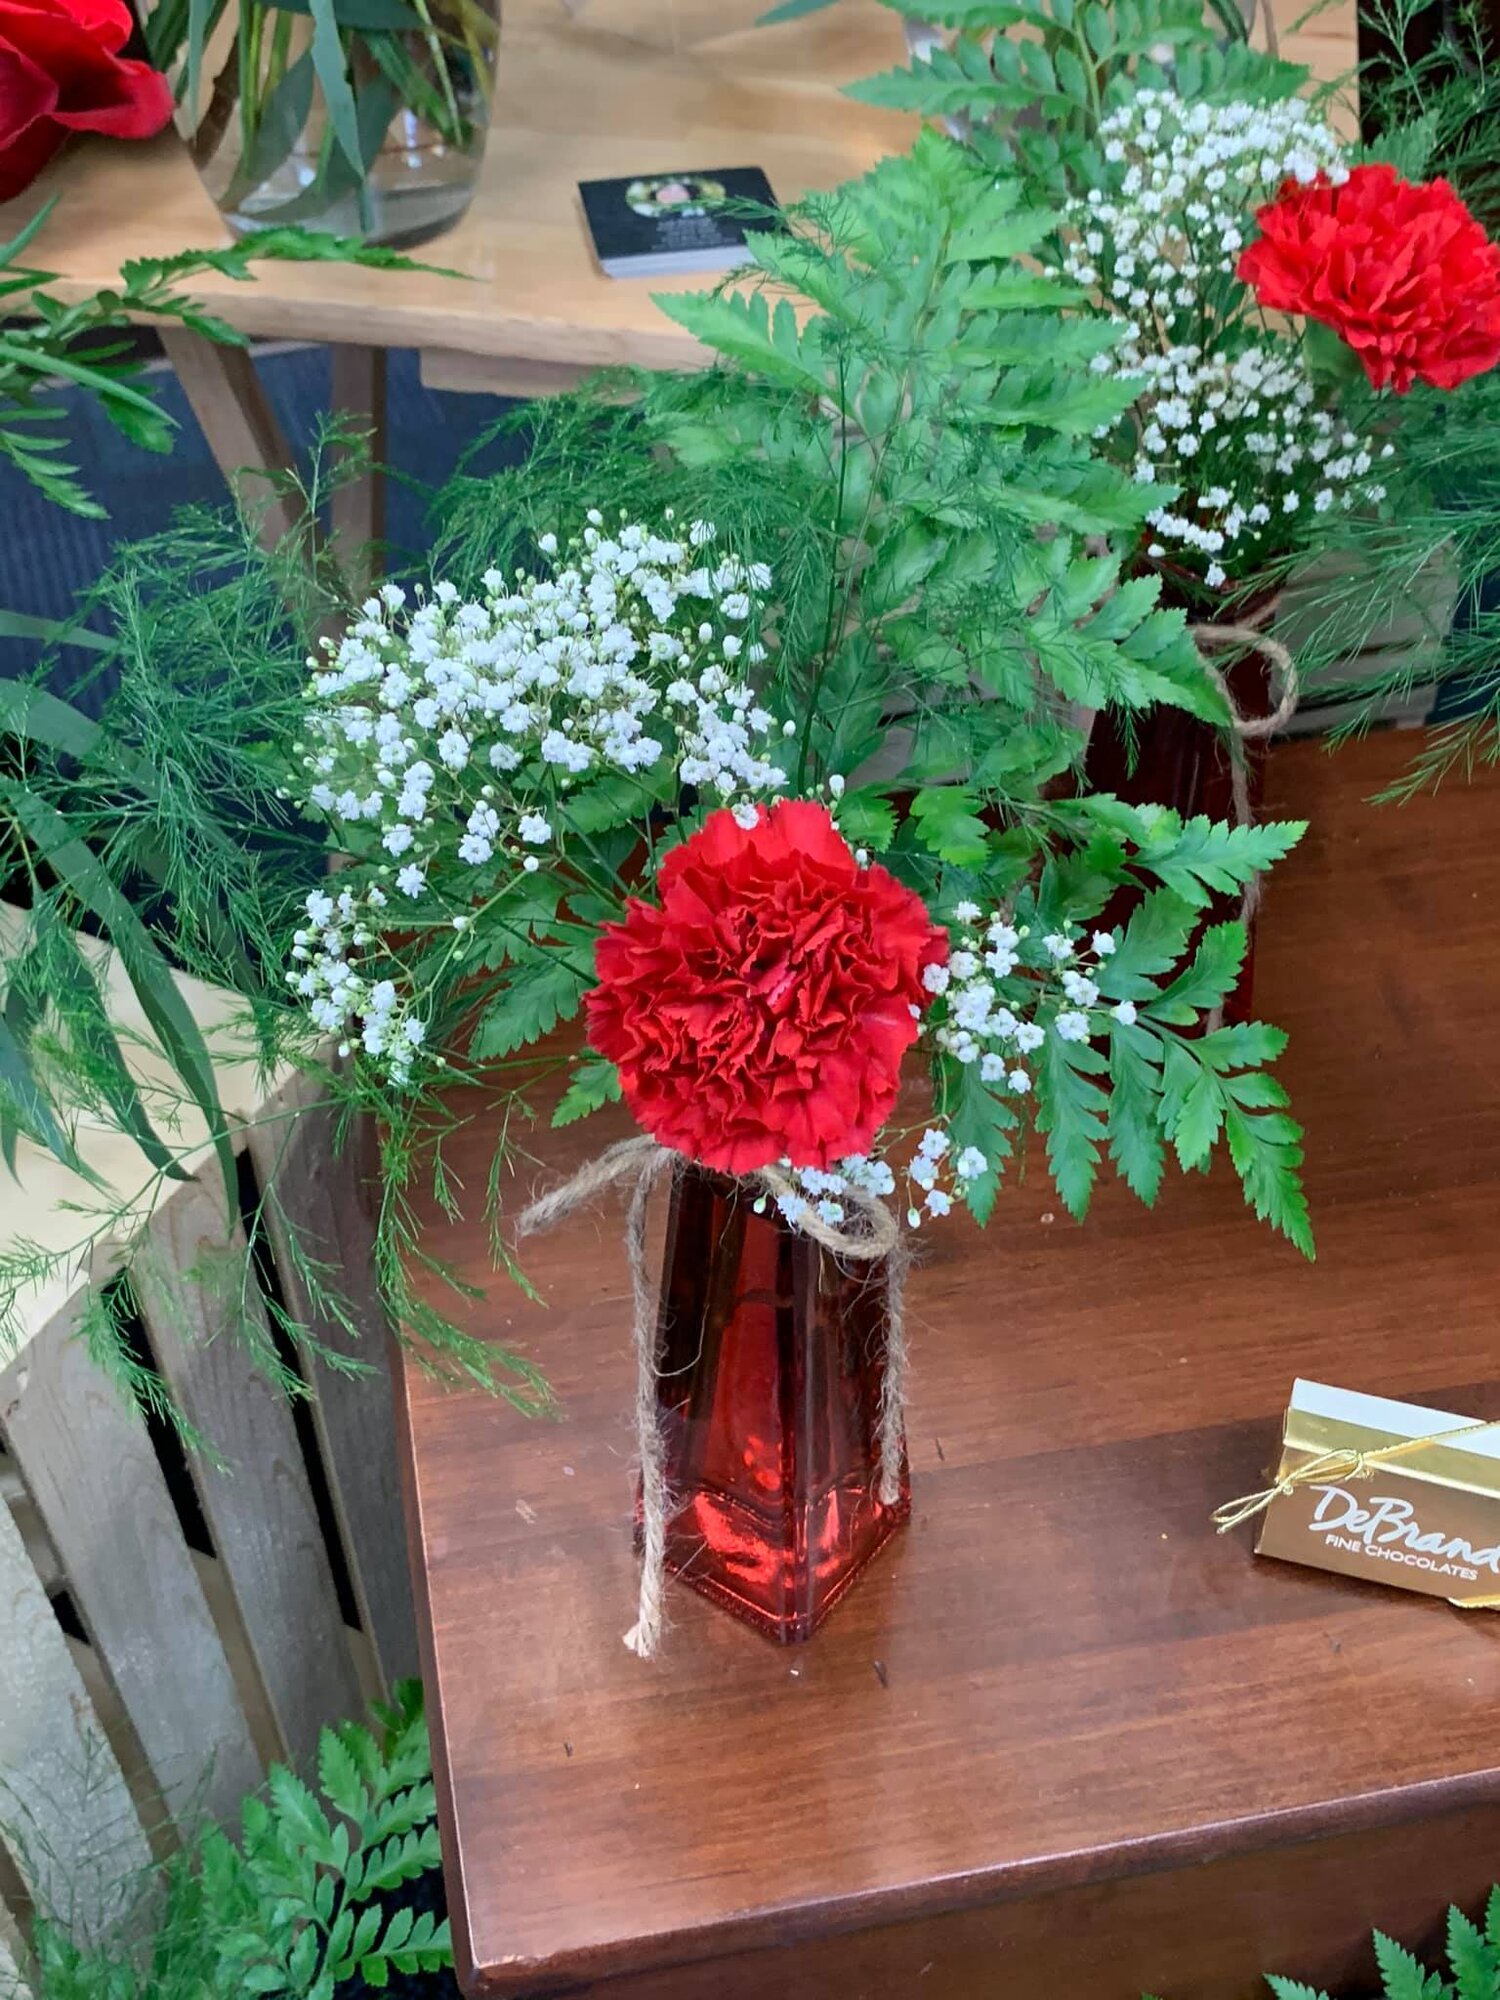 The bud vases for $8 are awesome!